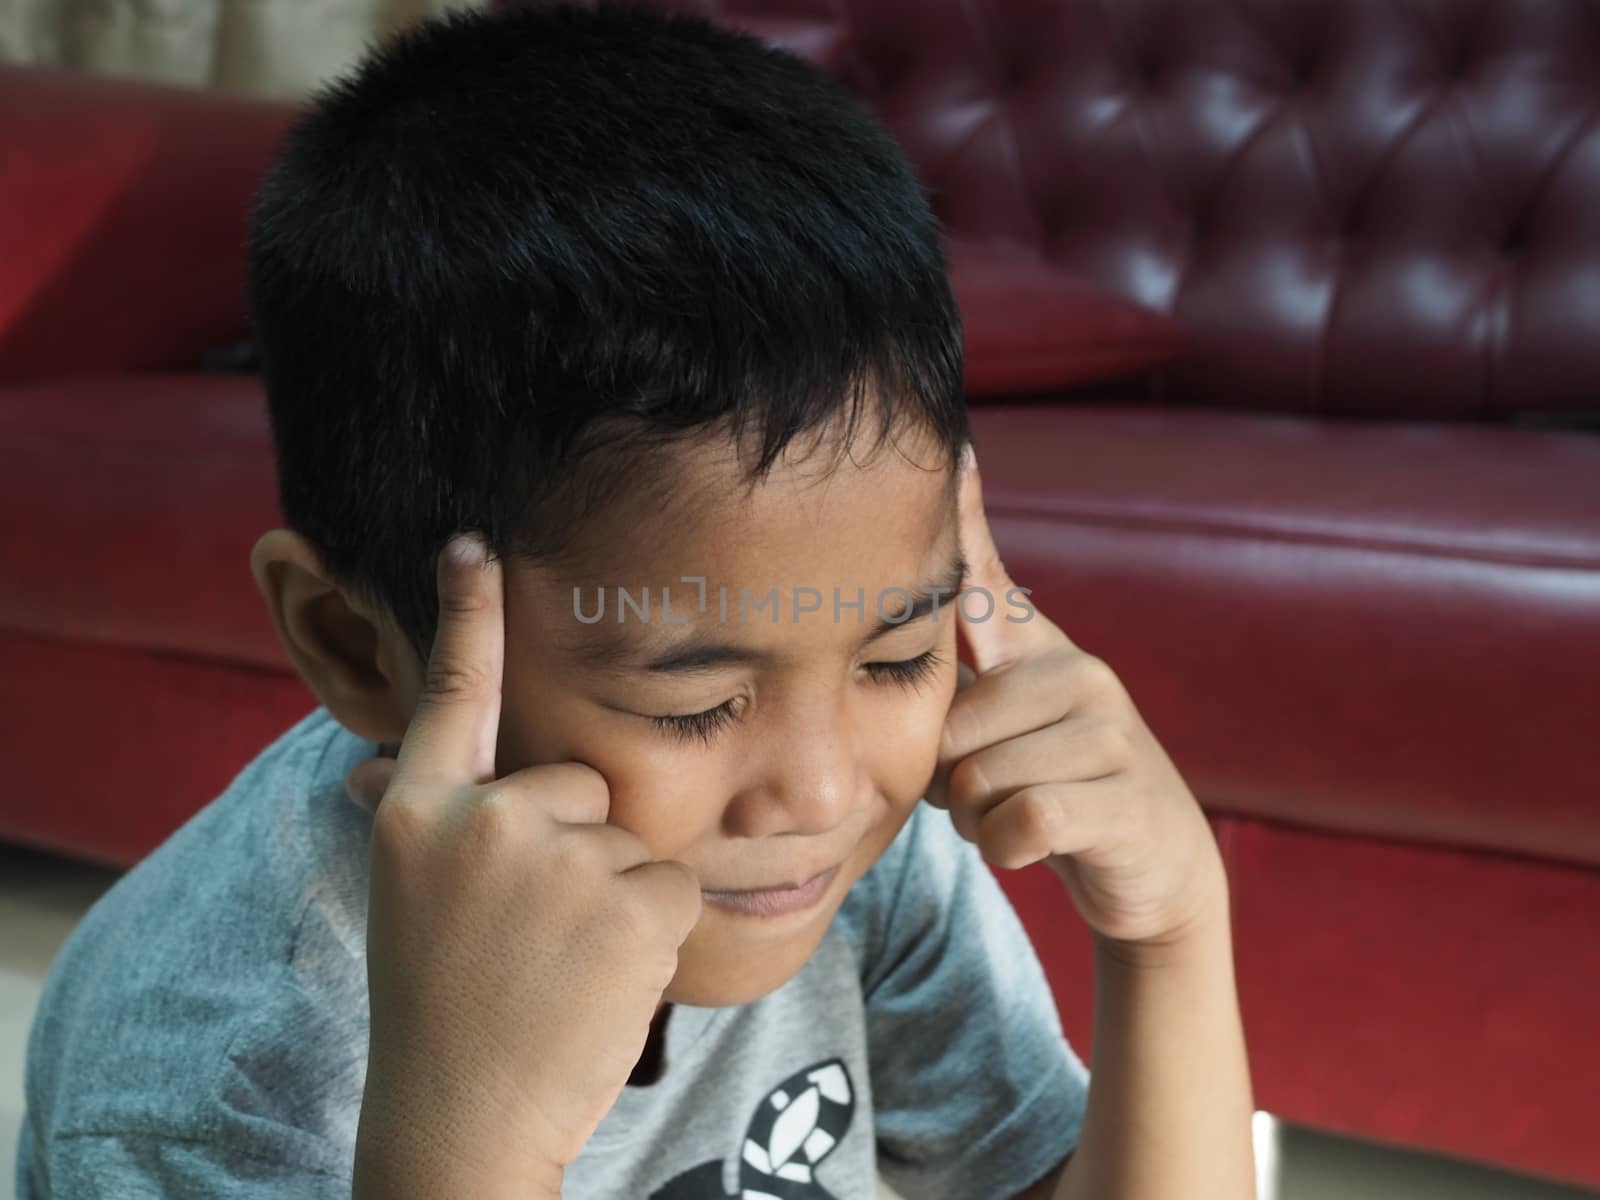 A boy in a headache On the background of the red sofa in the house.